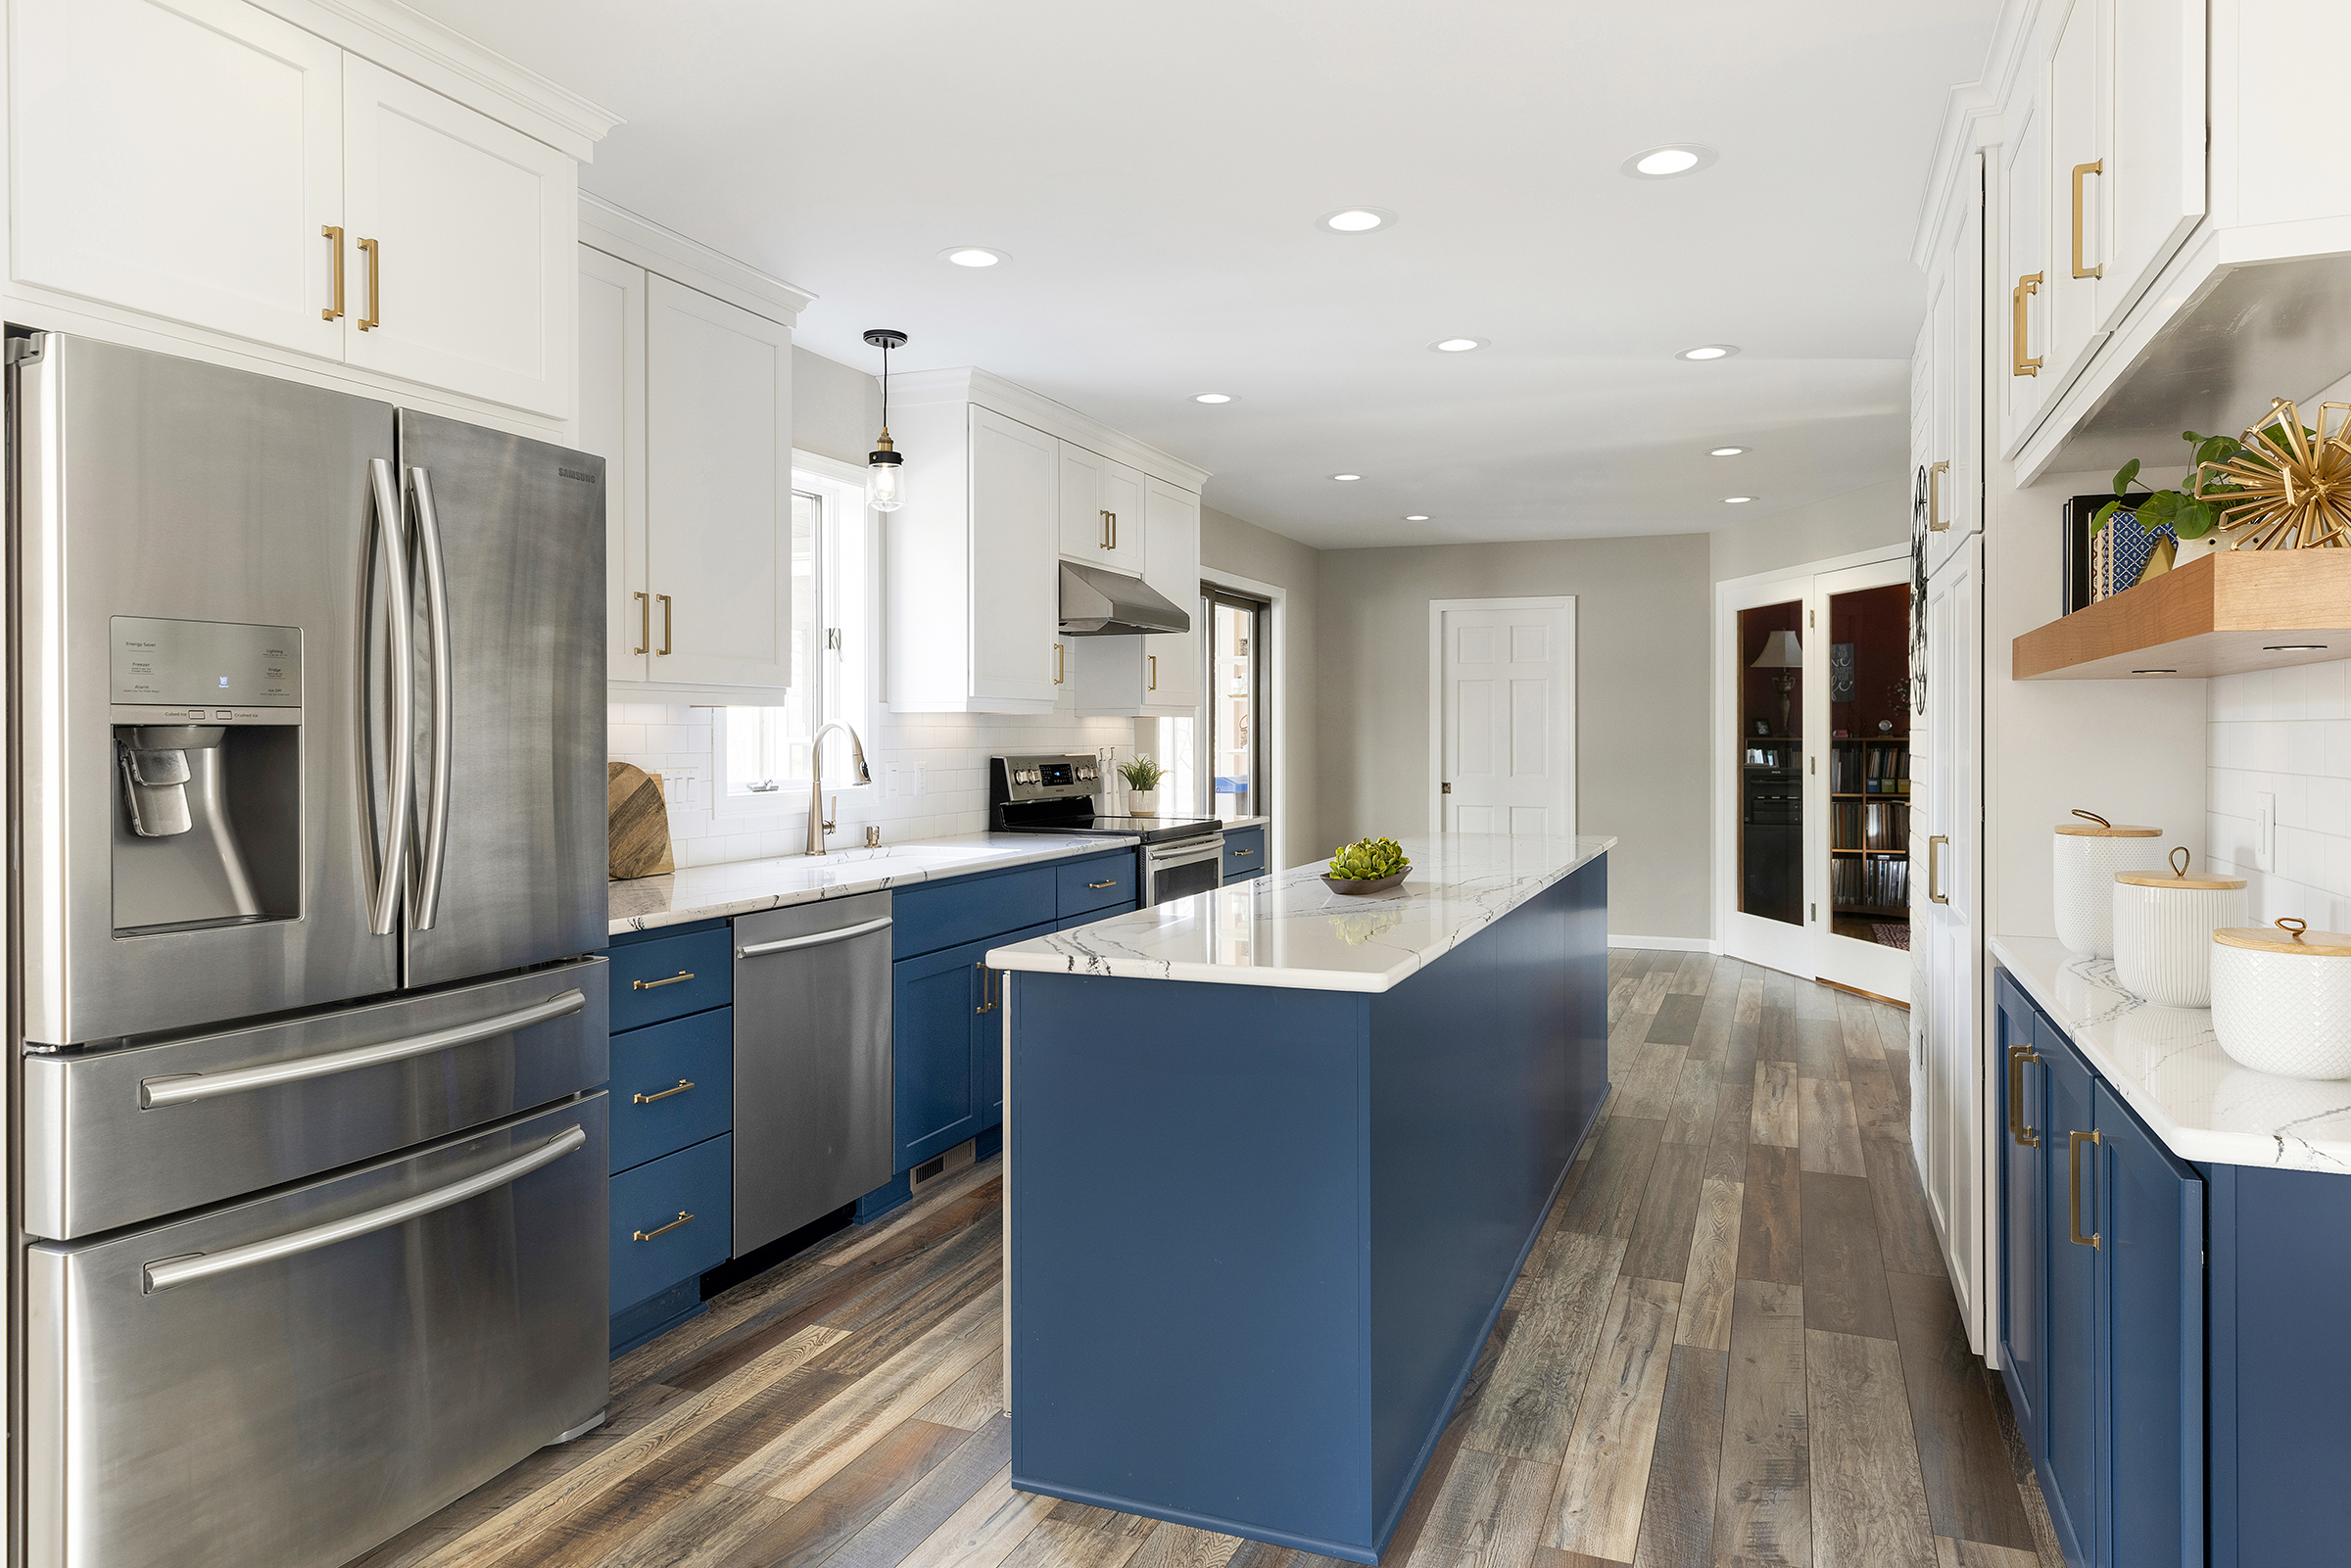 Kitchen remodel with large blue island, white marble counters, wooden floating shelf, and gold handles